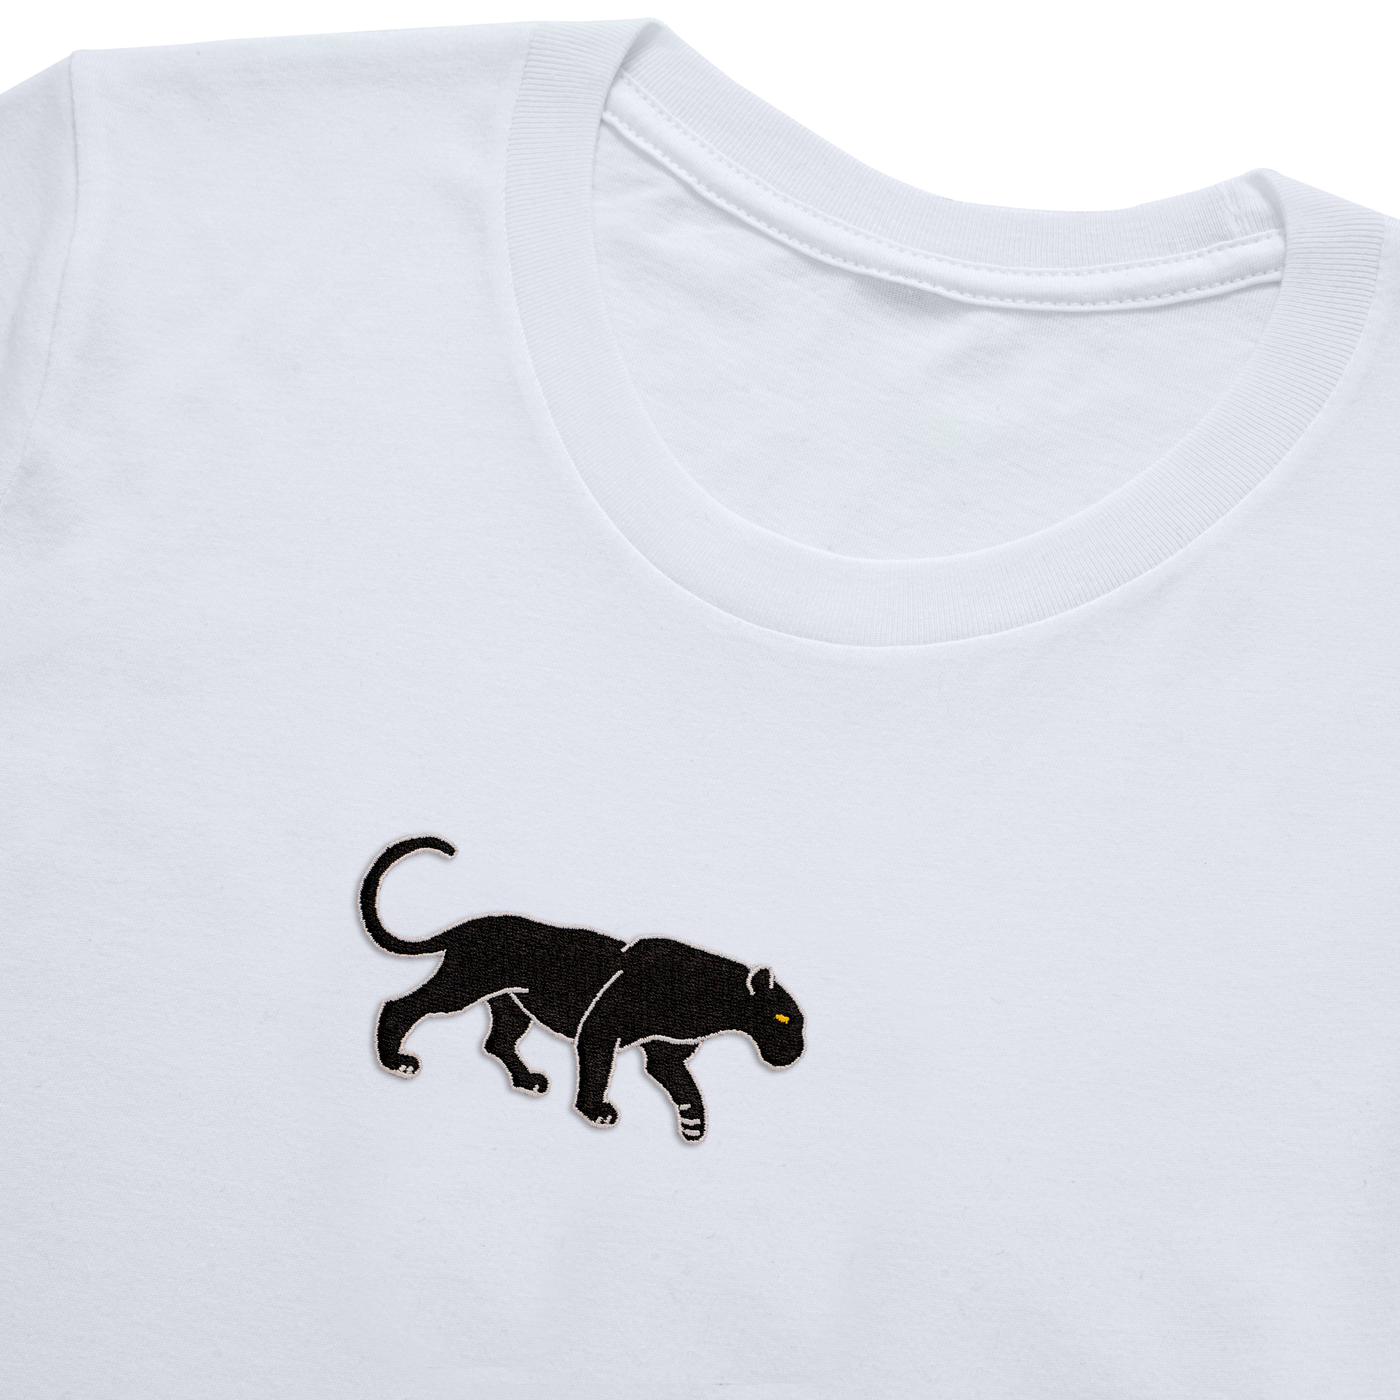 Bobby's Planet Kids Embroidered Black Jaguar T-Shirt from South American Amazon Animals Collection in White Color#color_white